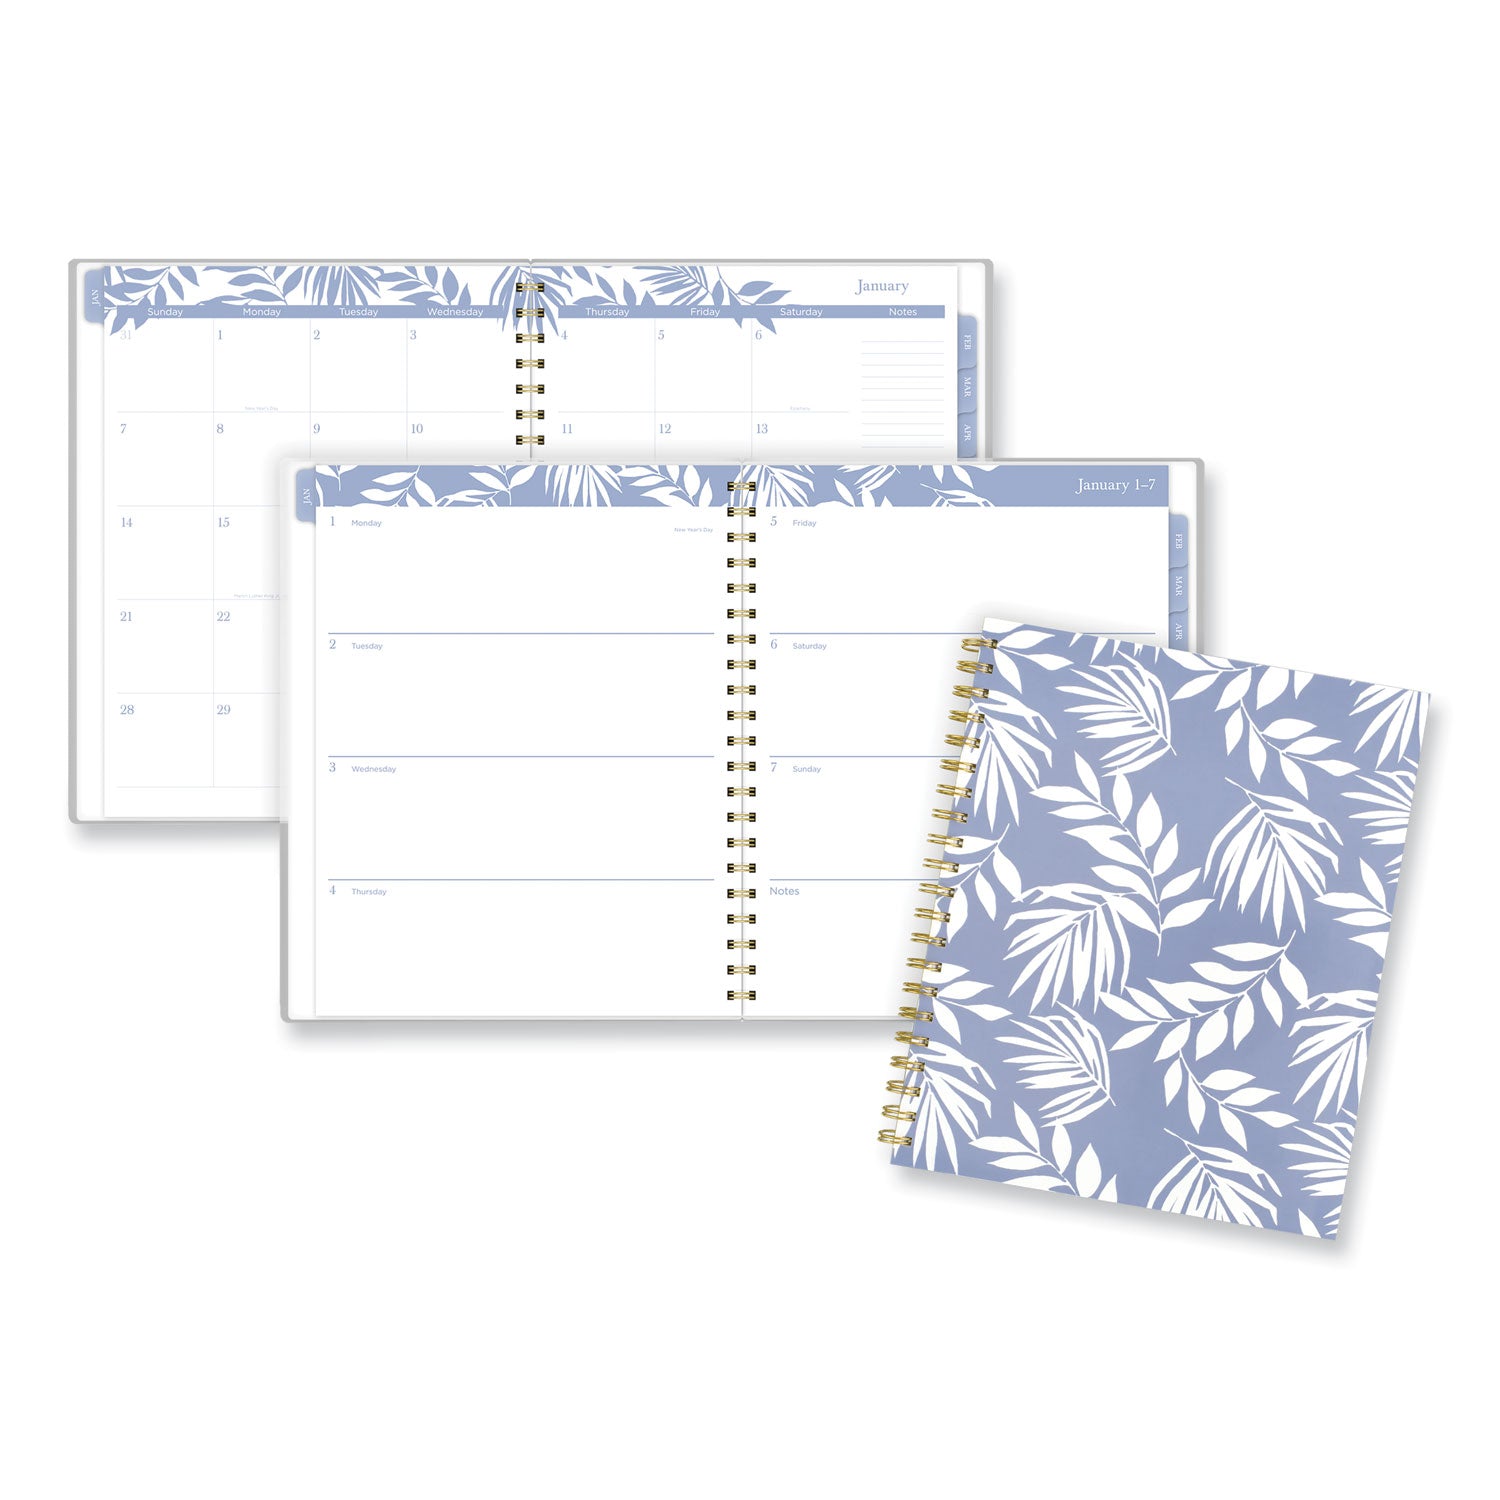 elena-weekly-monthly-planner-palm-leaves-artwork-11-x-925-blue-white-cover-12-month-jan-to-dec-2024_aag1680905 - 1